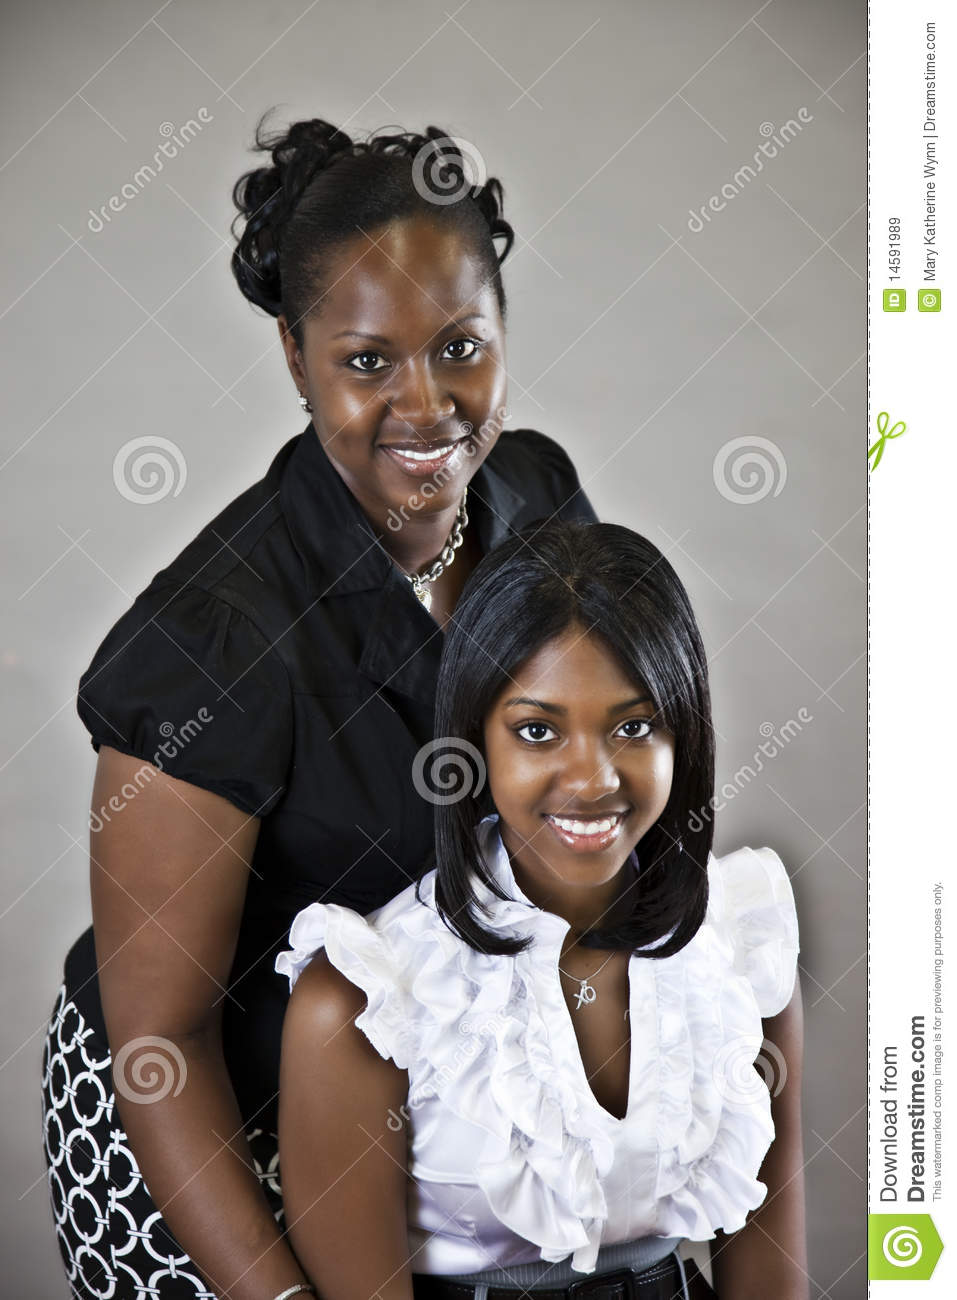 African American Mother And Daughter Royalty Free Stock Images   Image